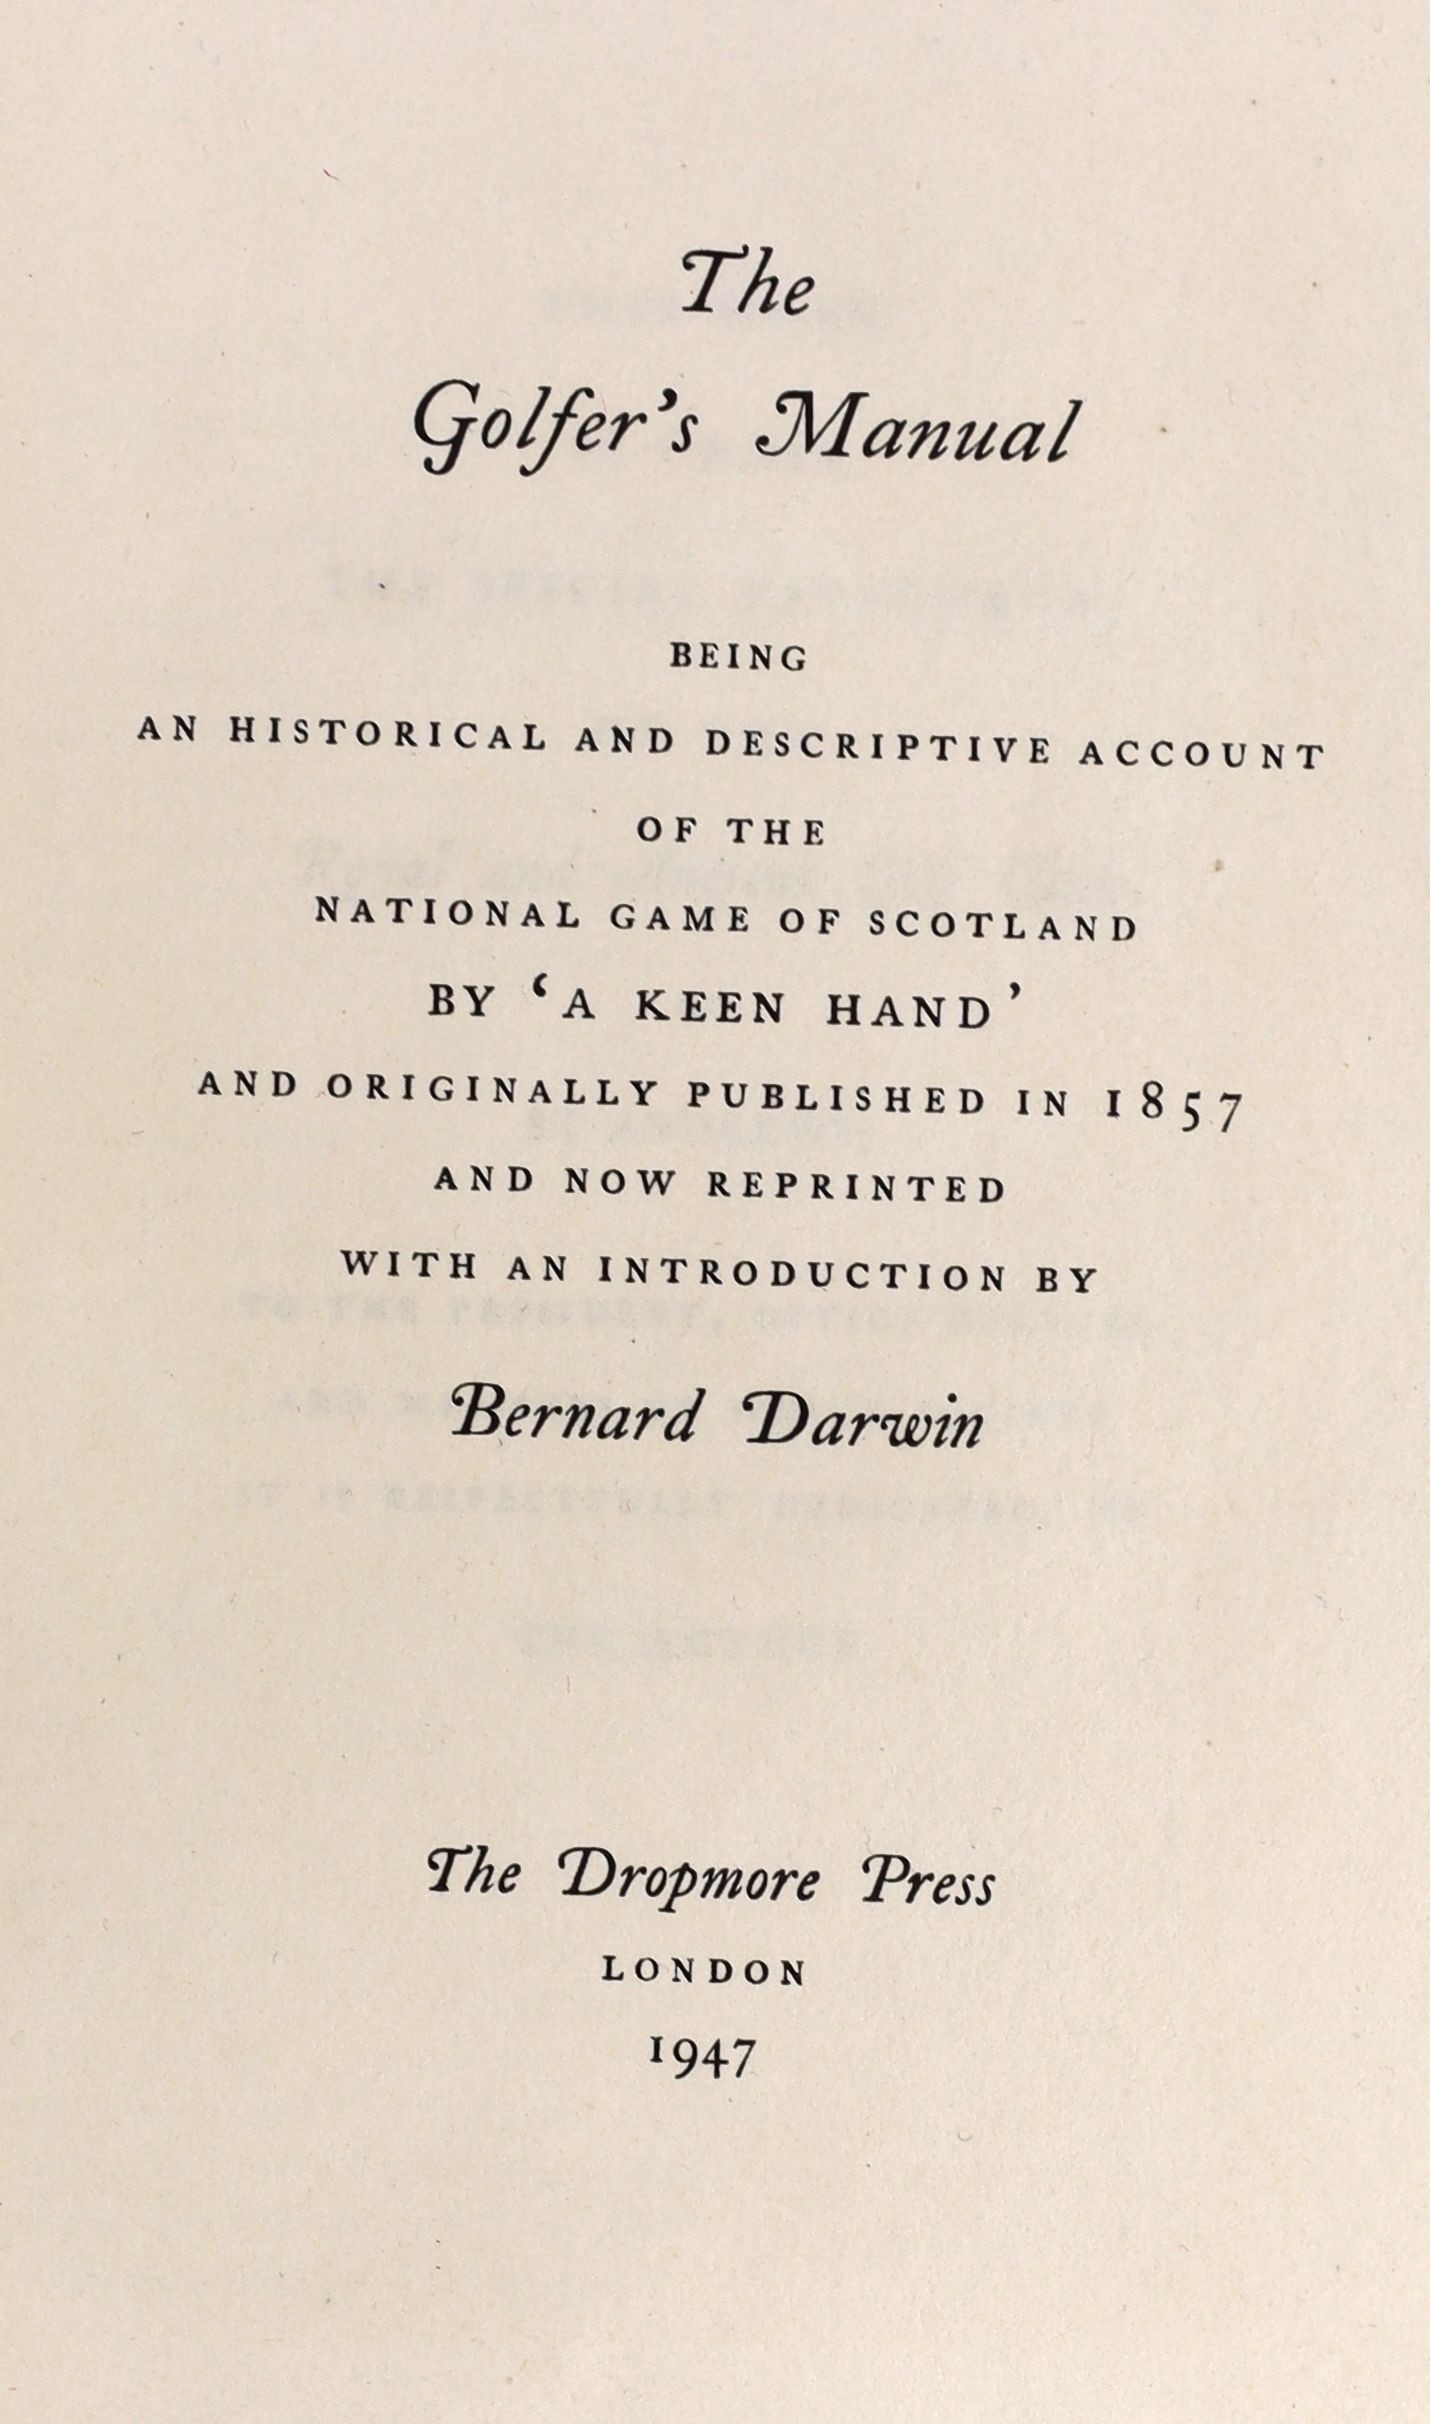 [Anon] - Introduction by Bernard Darwin - A Golfer’s Manuel, one of 750, 8vo, with d/j, wood-engravings by John O’Connor, Dropmore Press, 1947